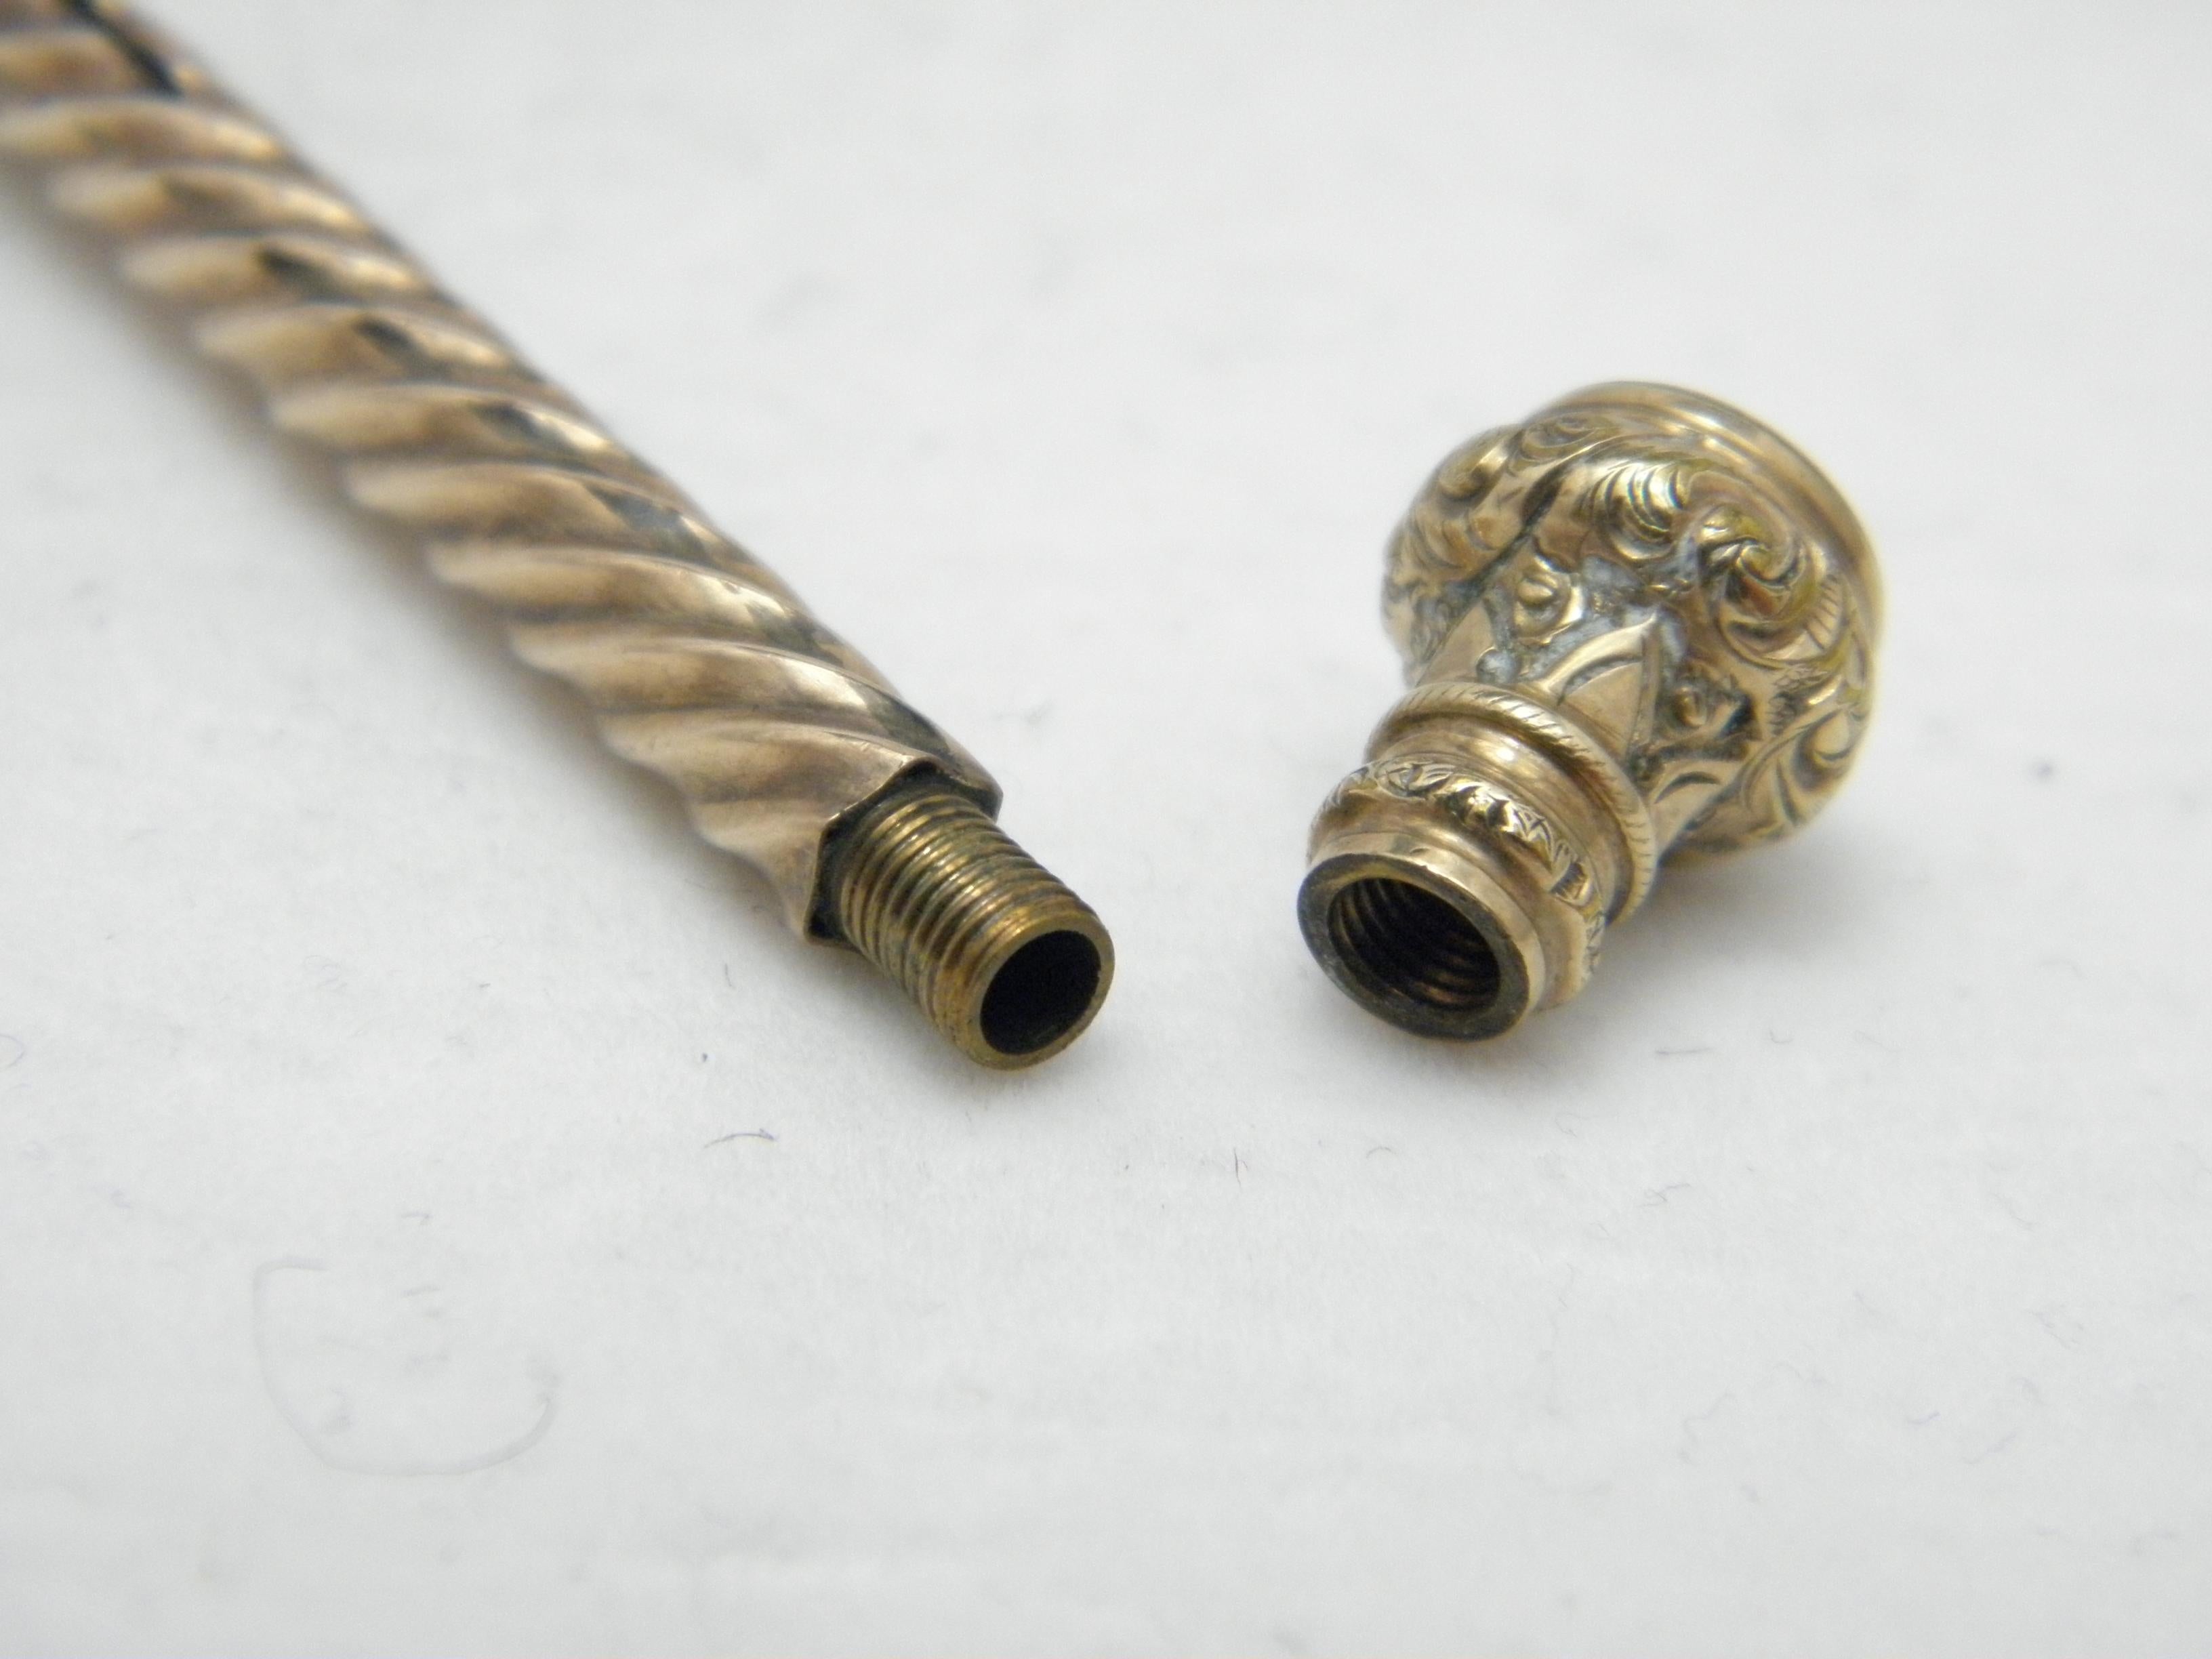 Antique 9ct Rose Gold Propelling Pencil c1850 375 Purity Large Heavy 7.5g For Sale 4